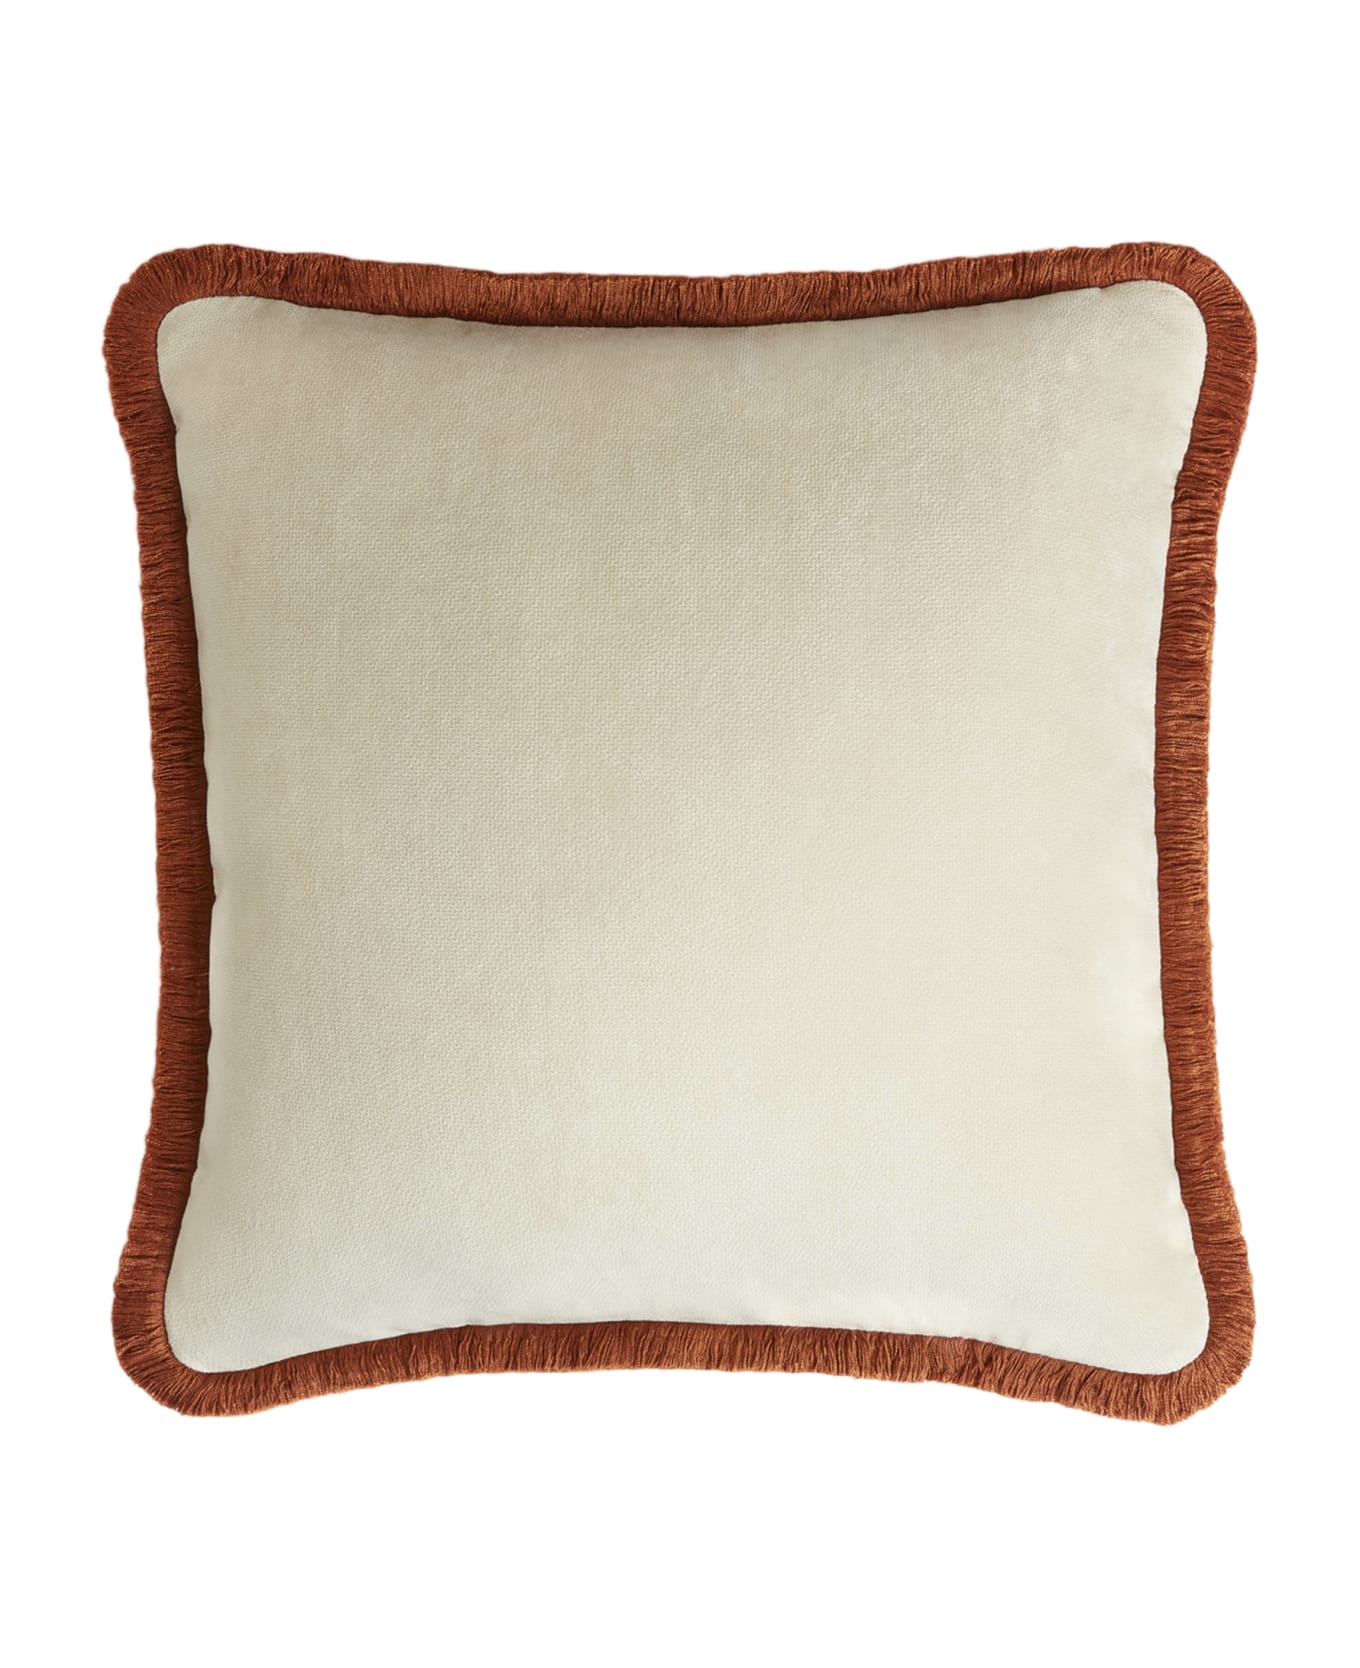 Lo Decor Happy Pillow   Dirty White Velvet With Brick Red Fringes - Dirty White / Brick red